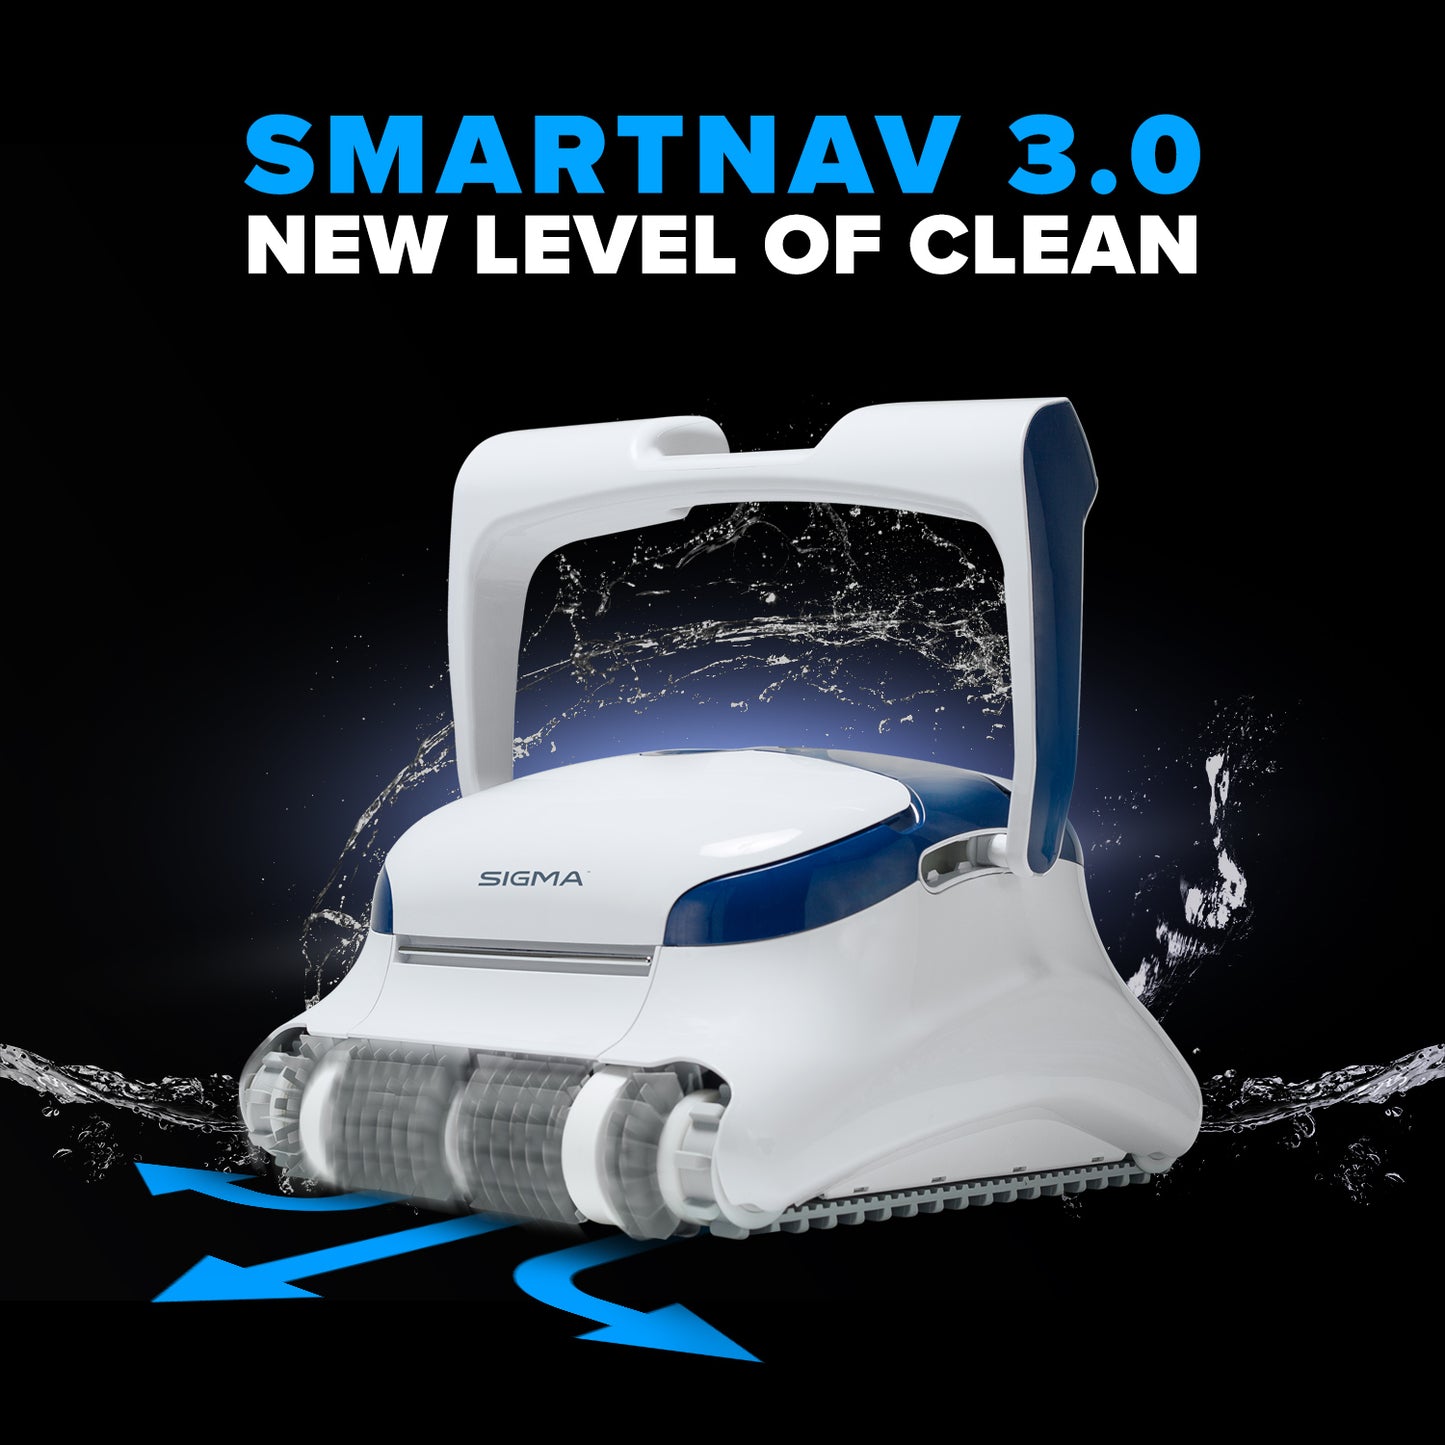 Dolphin Sigma Robotic Pool Cleaner - Refurbished